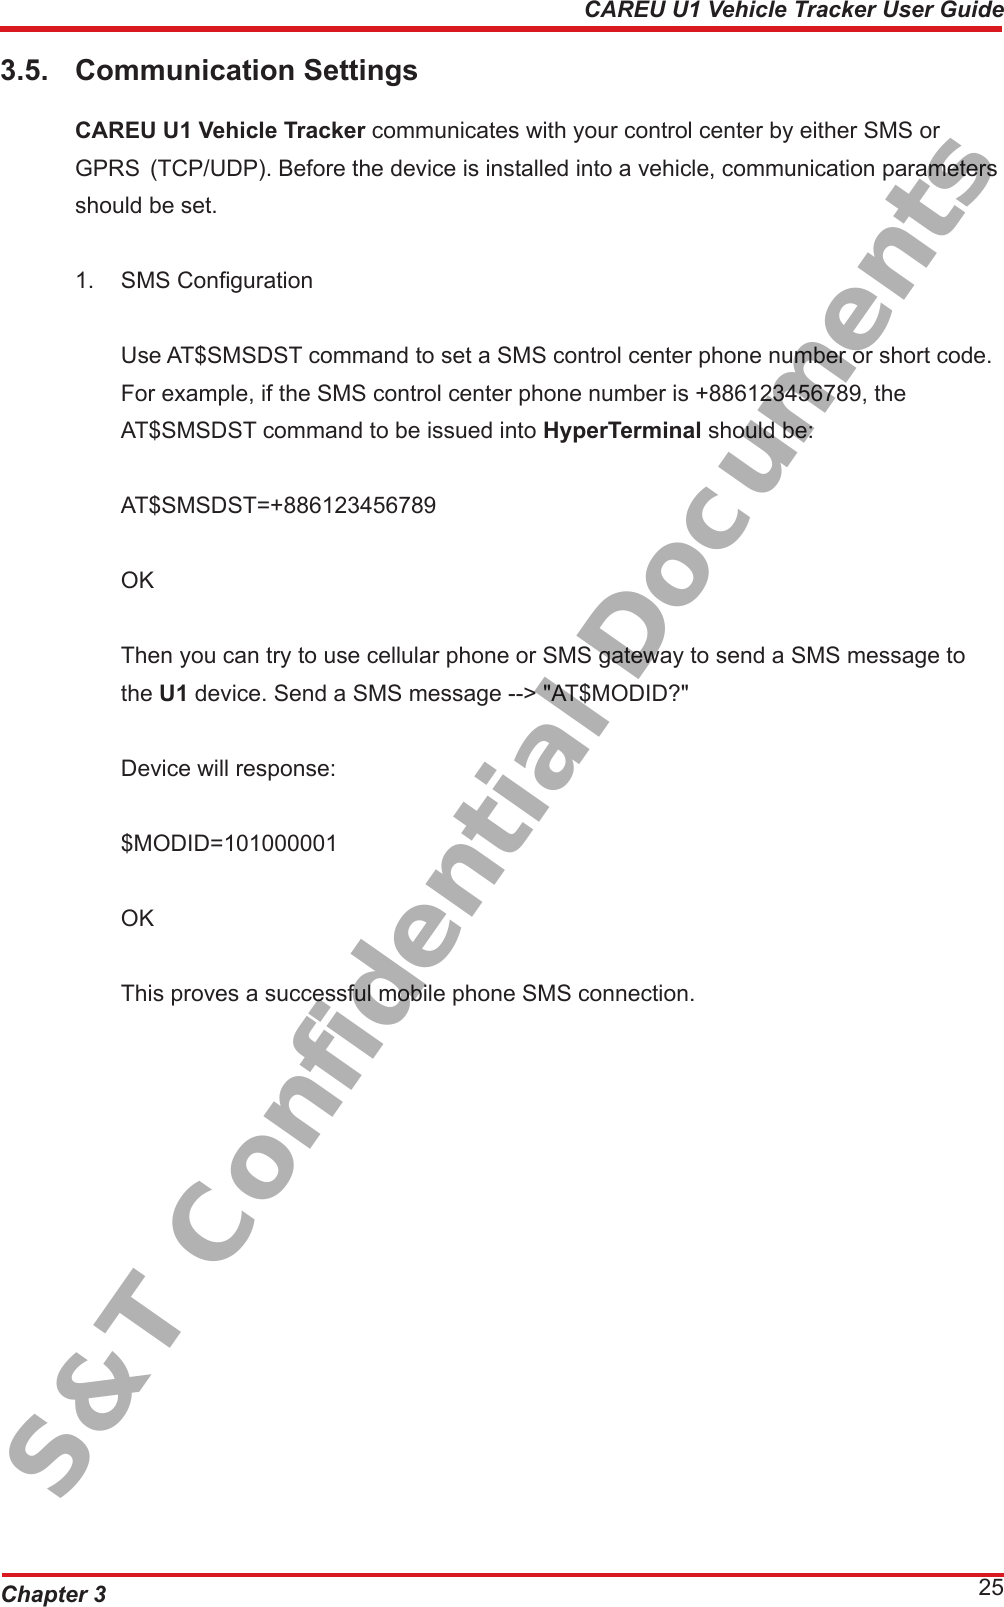 Chapter 3 25CAREU U1 Vehicle Tracker User Guide3.5.  Communication Settings CAREU U1 Vehicle Tracker communicates with your control center by either SMS or      GPRS  (TCP/UDP). Before the device is installed into a vehicle, communication parameters    should be set.1.  SMS Conguration  Use AT$SMSDST command to set a SMS control center phone number or short code.    For example, if the SMS control center phone number is +886123456789, the      AT$SMSDST command to be issued into HyperTerminal should be:   AT$SMSDST=+886123456789   OK   Then you can try to use cellular phone or SMS gateway to send a SMS message to     the U1 device. Send a SMS message --&gt; &quot;AT$MODID?&quot;  Device will response:  $MODID=101000001  OK   This proves a successful mobile phone SMS connection.S&amp;T Confidential Documents